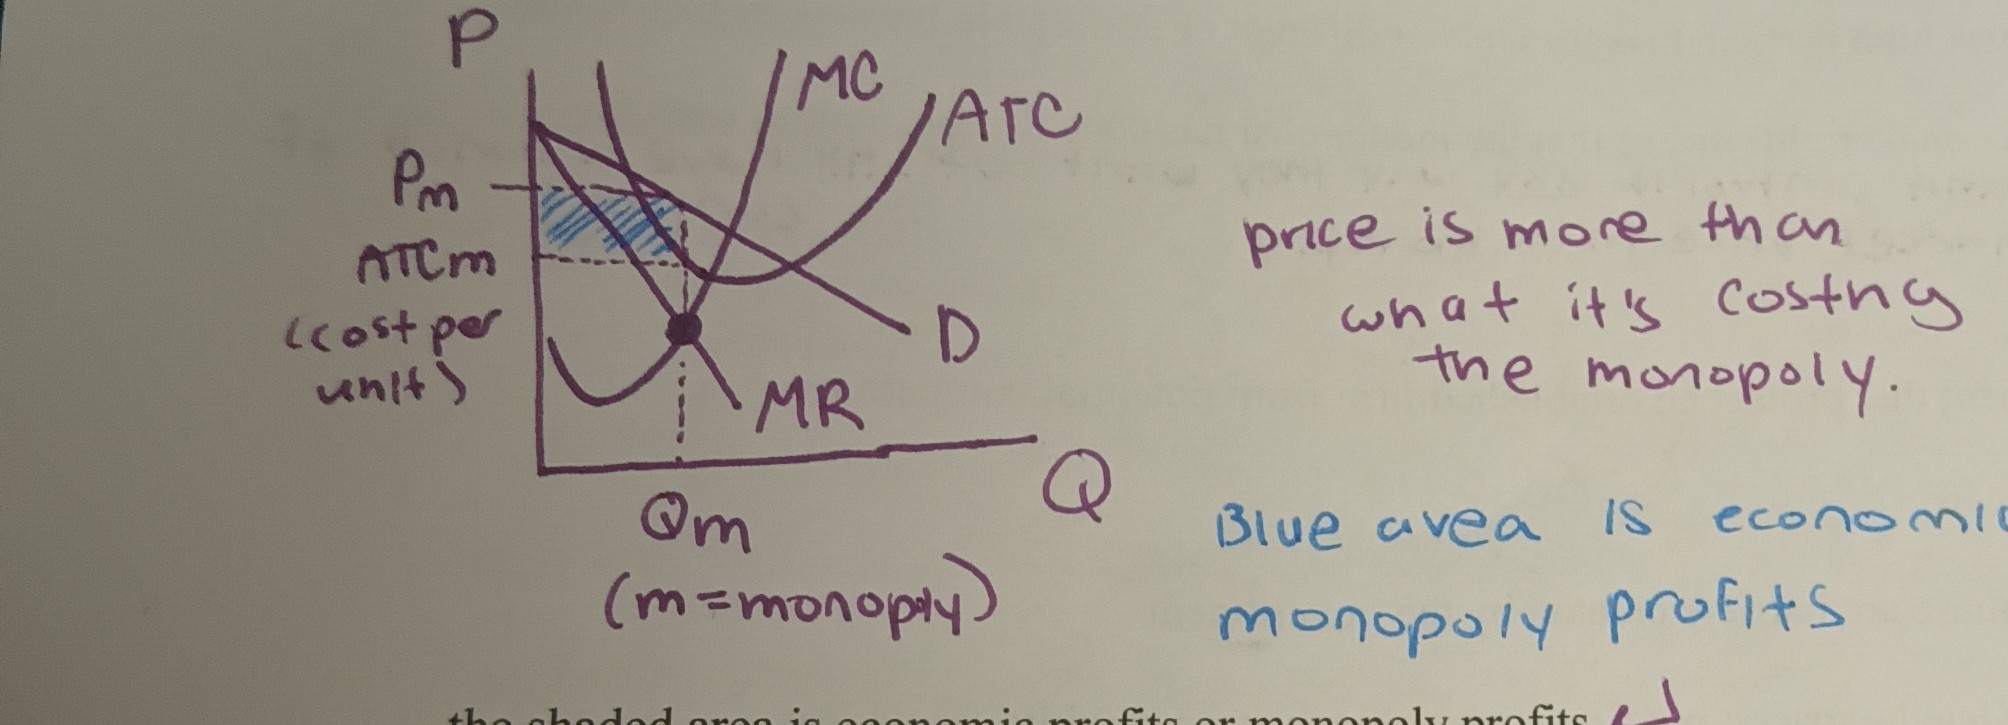 <p>They use the general profits max rule: monopolist produce where MR = MC</p><ul><li><p>The selling price is more than what it costs monopolies and they have no competition so you can expect them to make a profit.</p></li><li><p>The blue shaded area is the economic or monopoly profits</p></li></ul>